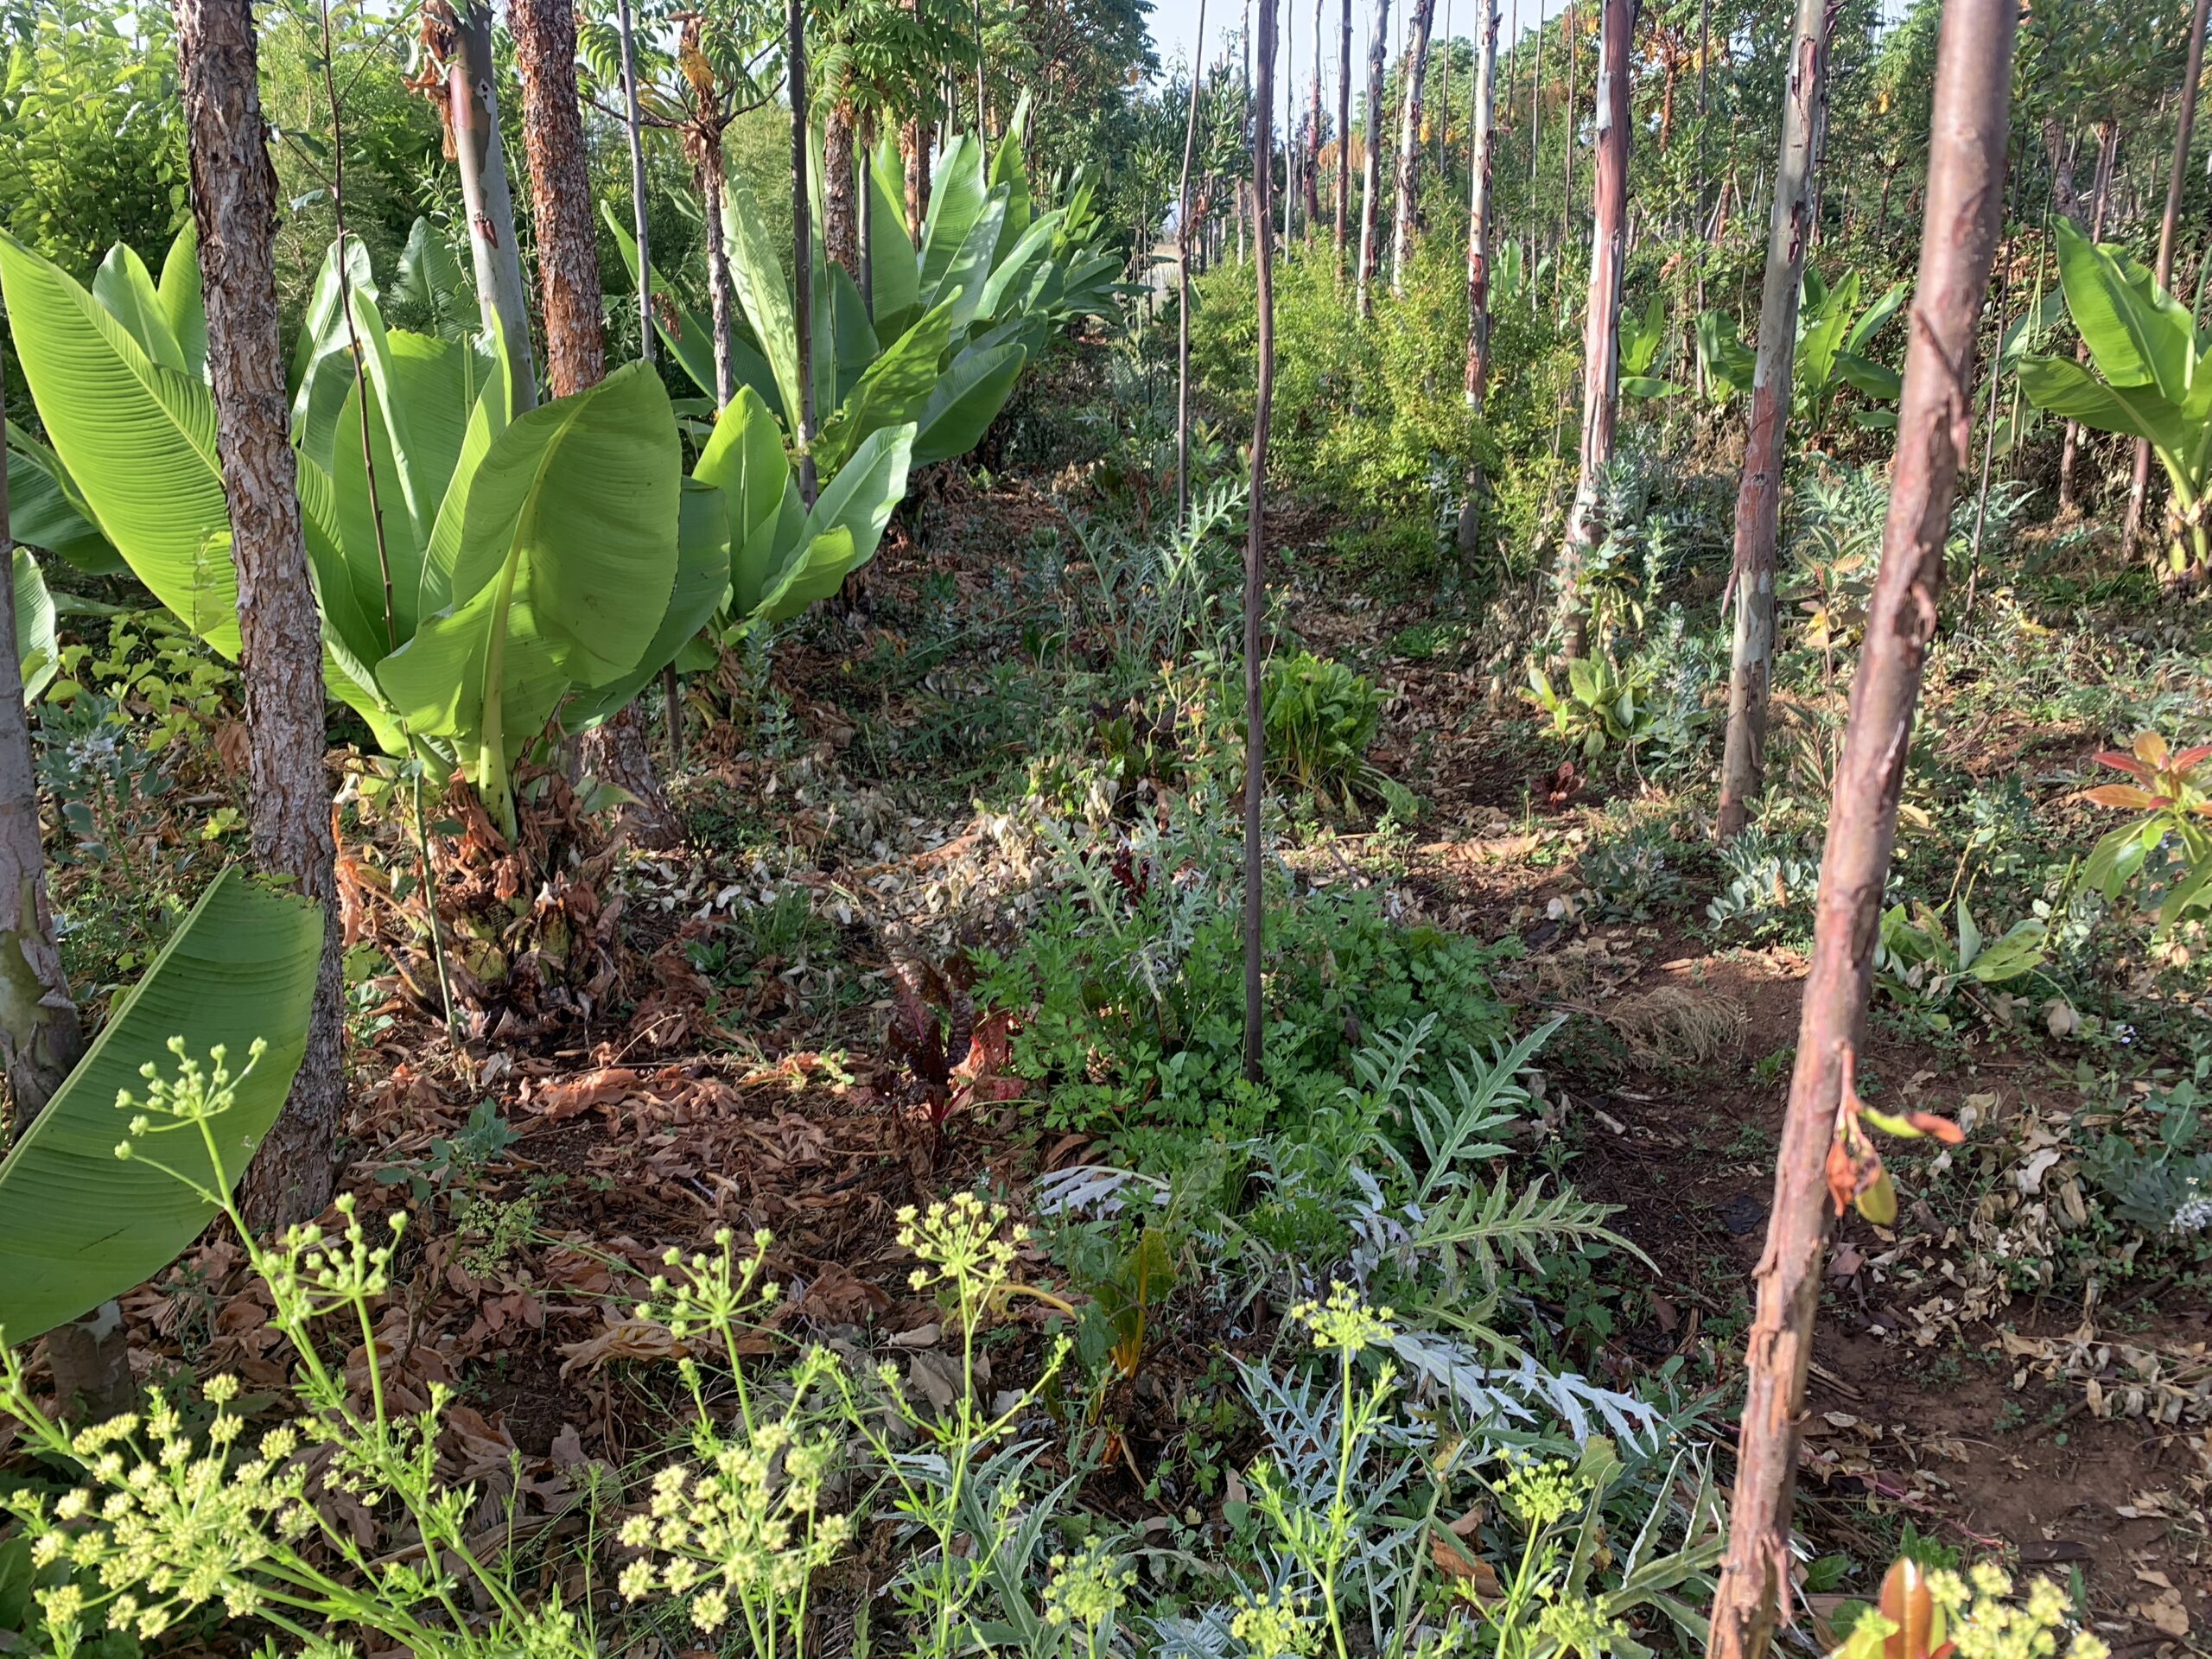 The Syntropic Agroforestry - Mulching